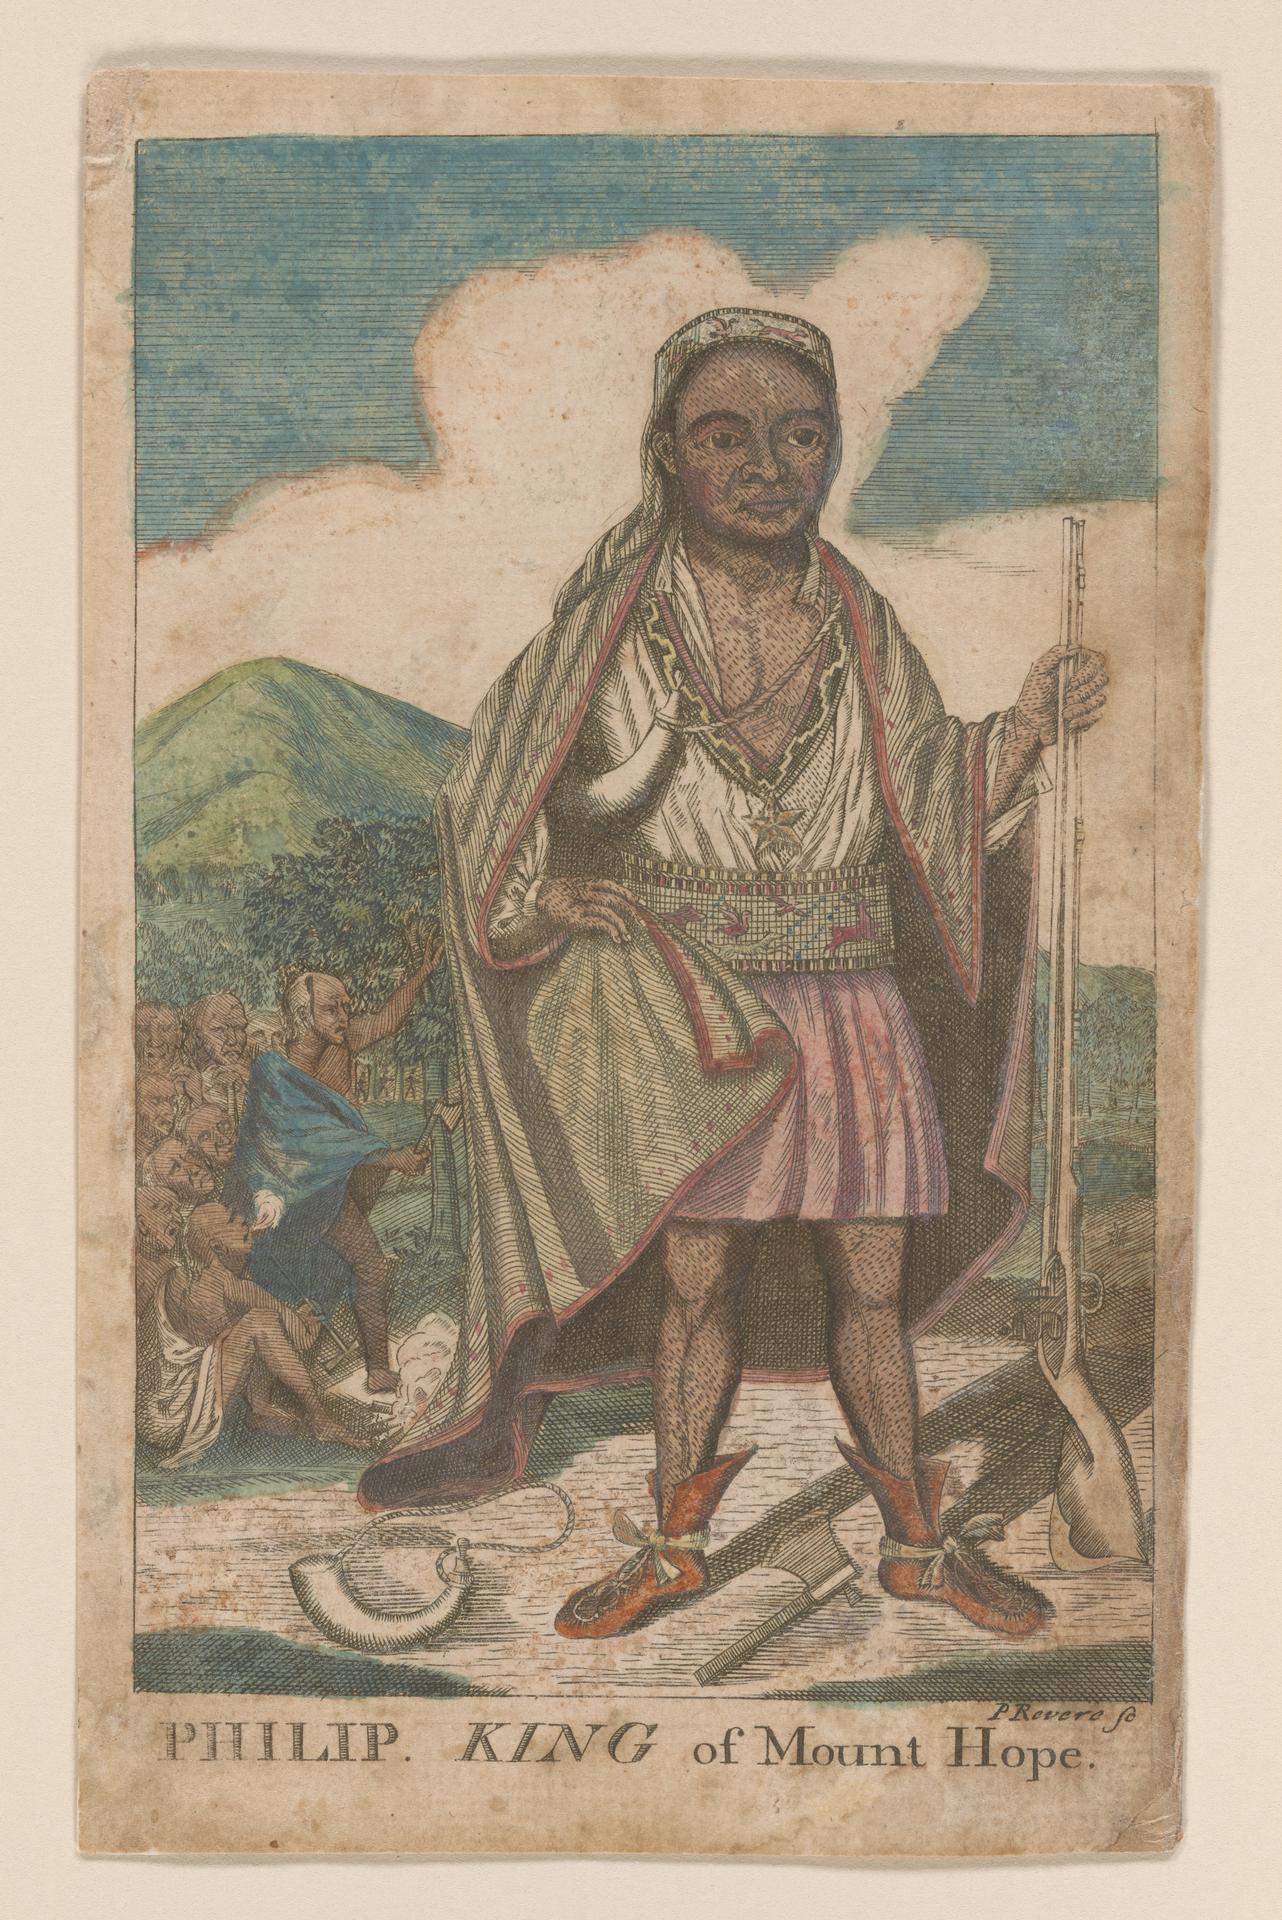 image of King Phillipp to link to project page